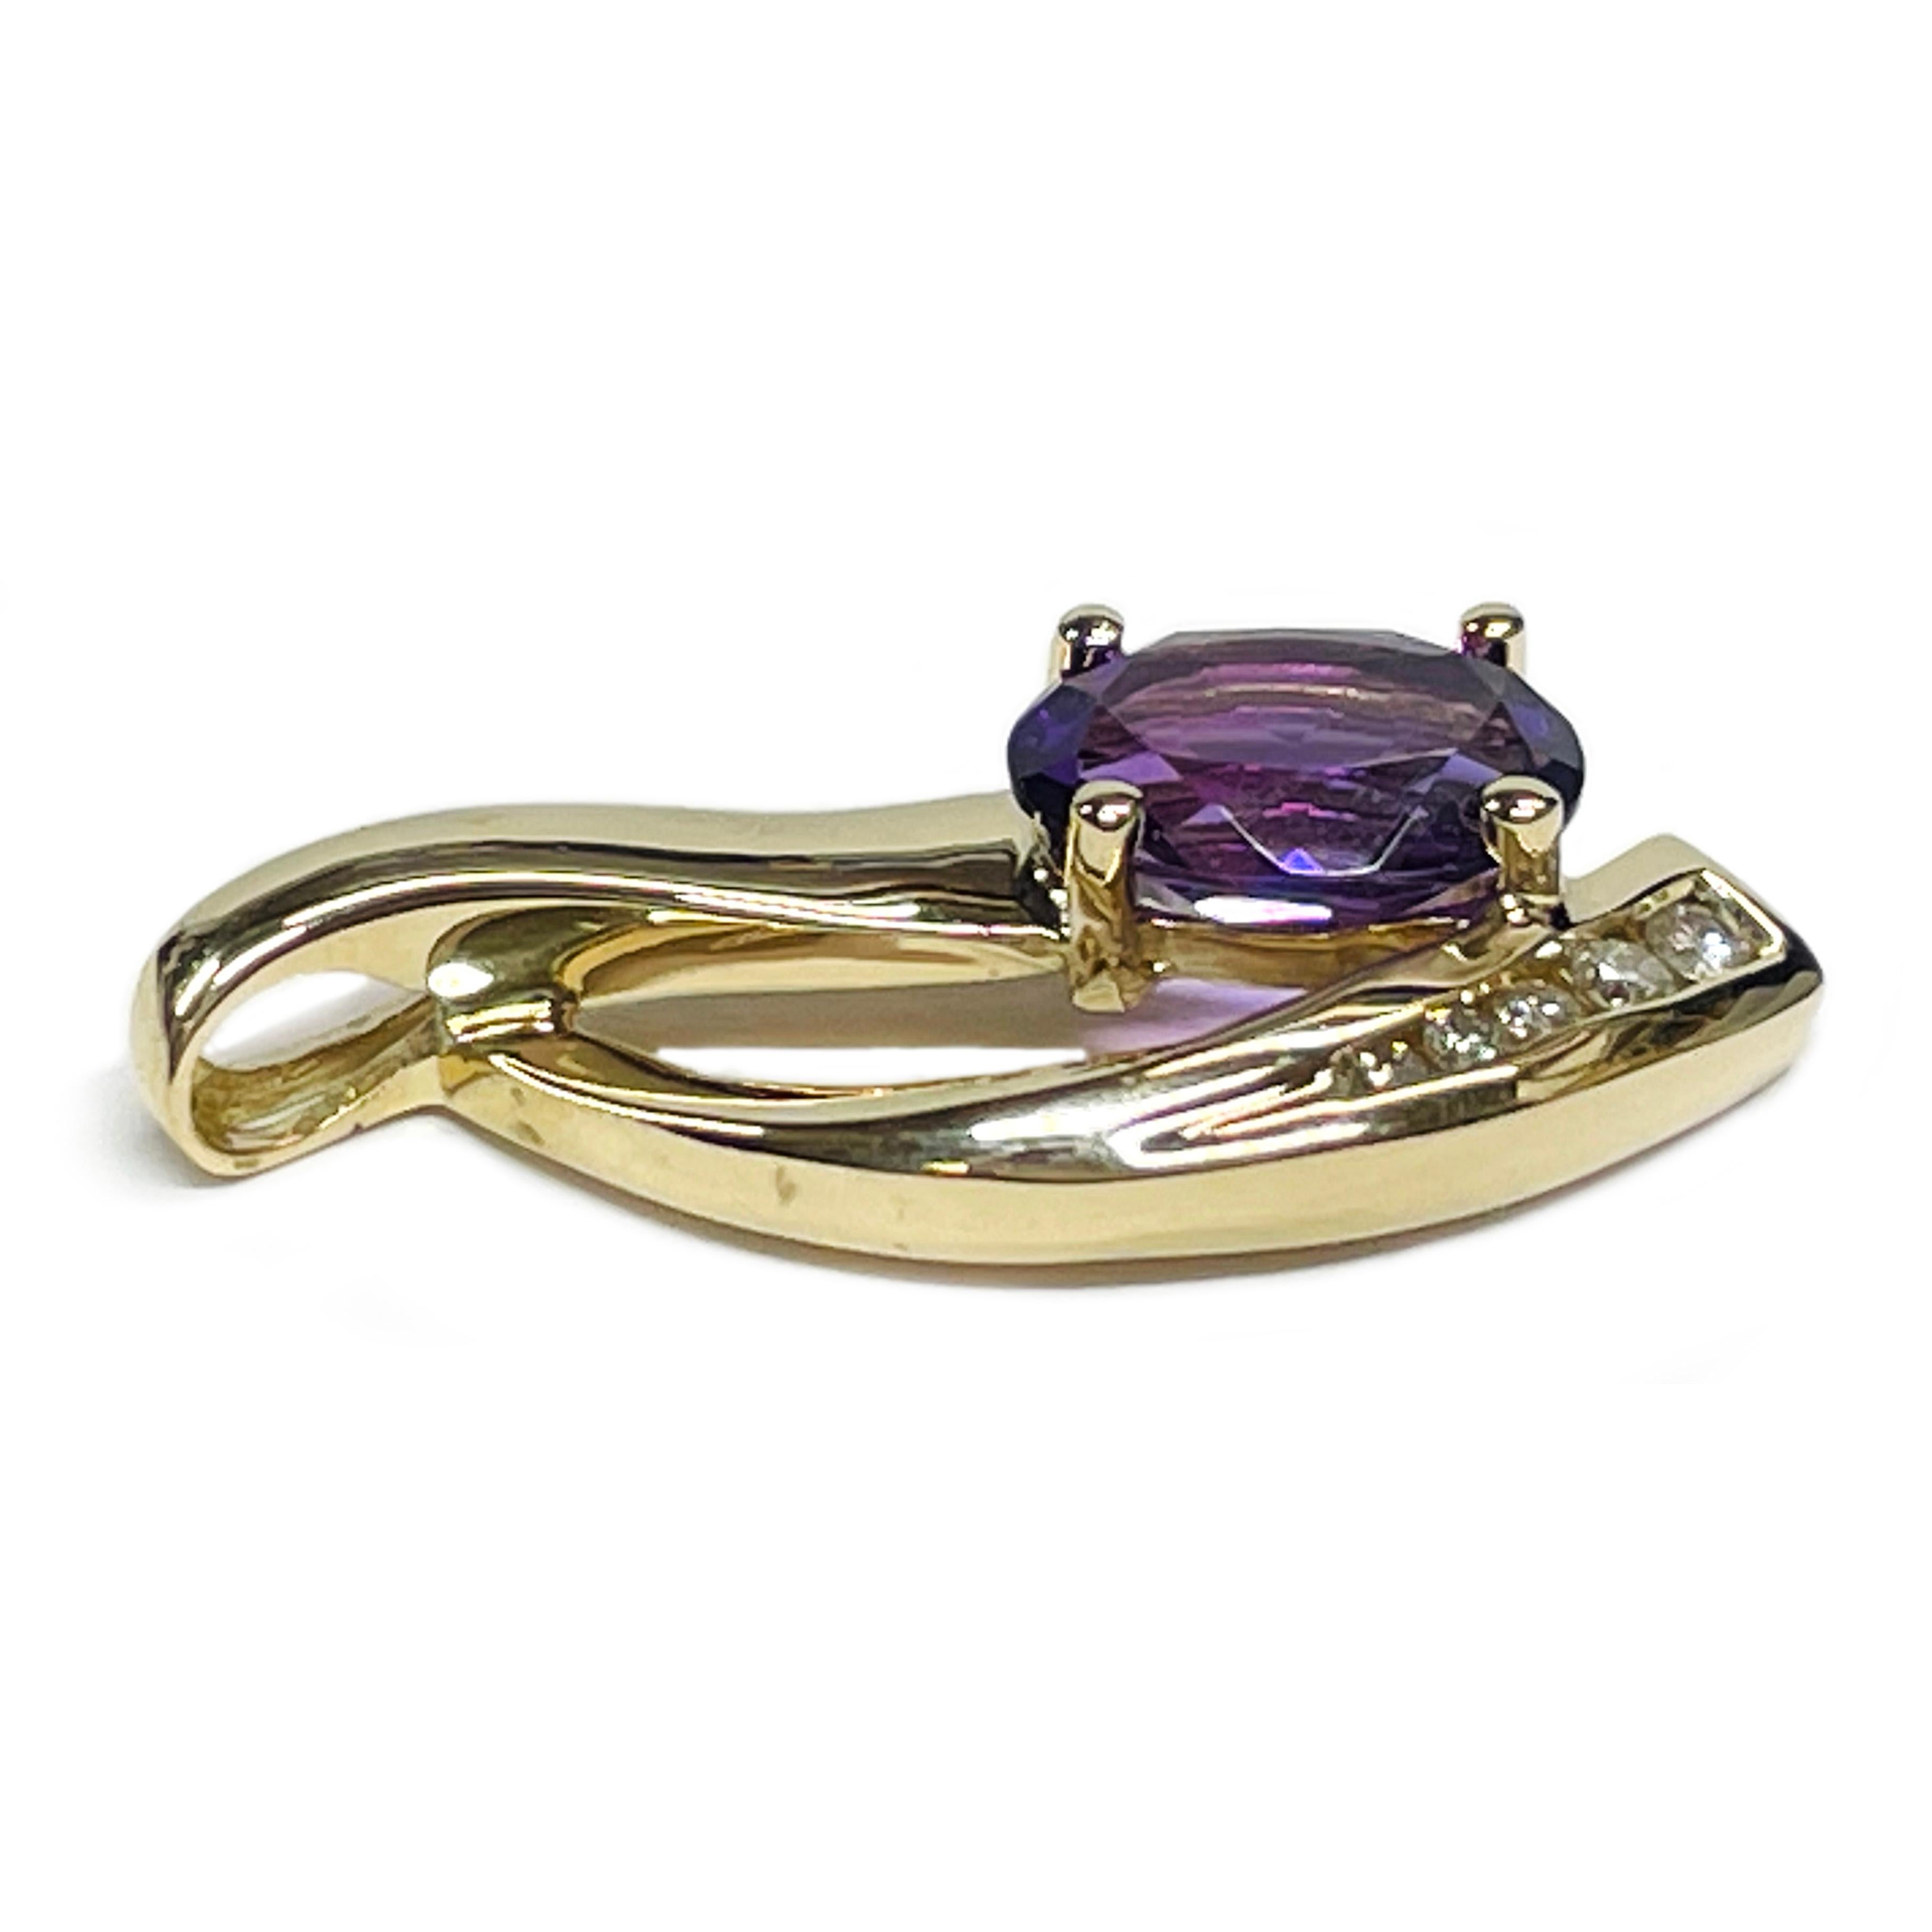 14 Karat Yellow Gold Amethyst Diamond Pendant. The pendant features two curved gold swooshes with one having an oval prong-set 9 x 7mm Amethyst and the other having five round graduate channel-set diamonds. The total carat weight of the diamonds is